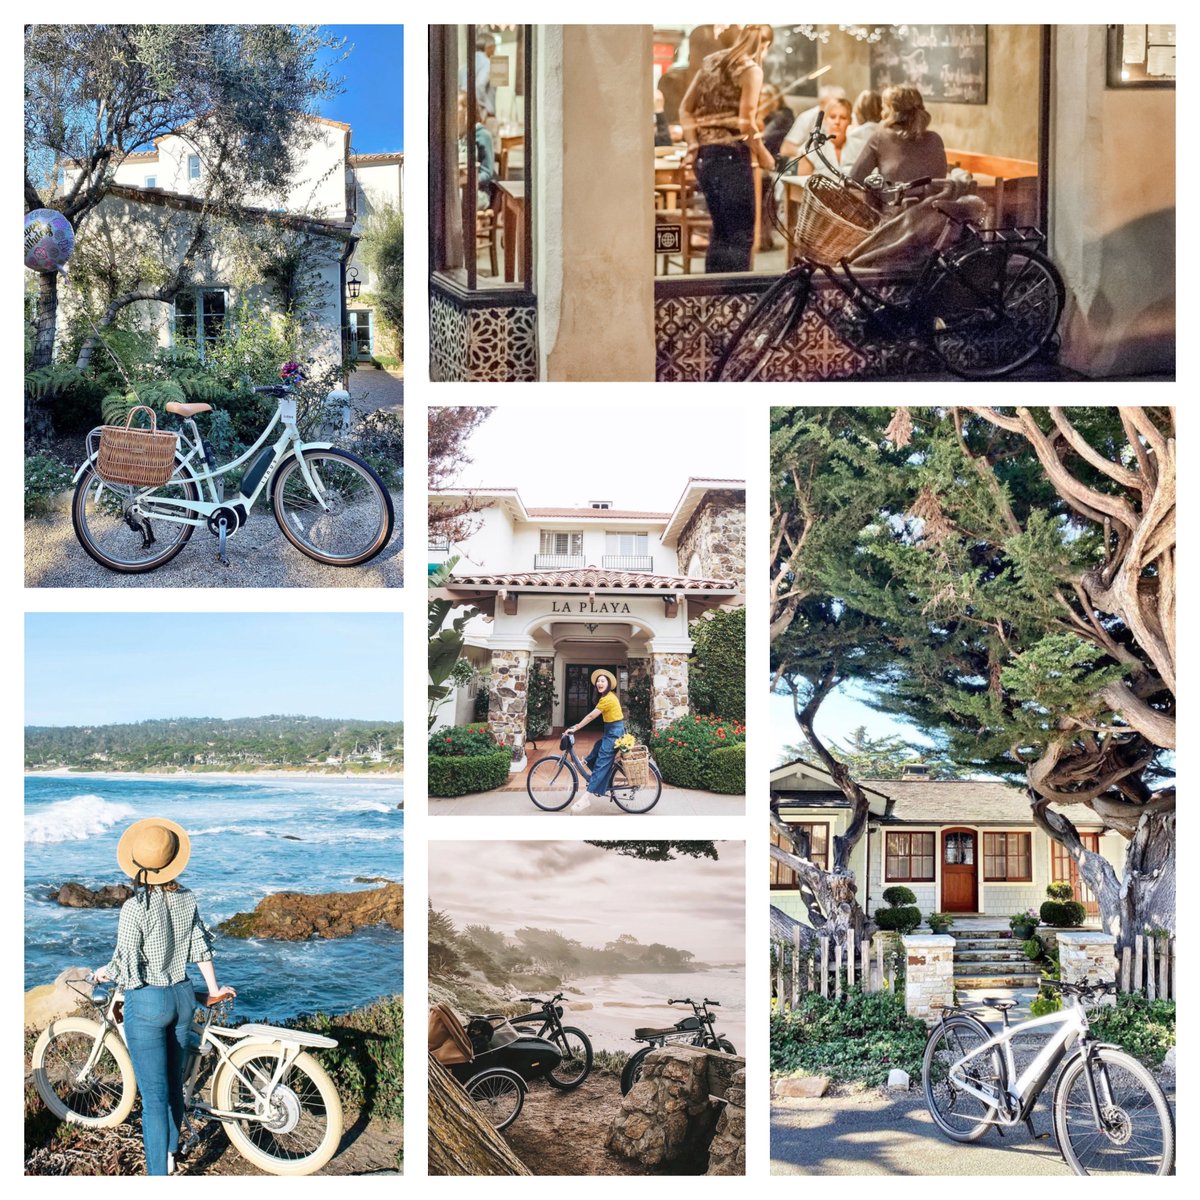 Carmel-by-the-Sea is a very nice looking place with its beautiful eclectic architecture, wealth of trees & natural scenery. Throw in some bikes and it looks even nicer. 🚲